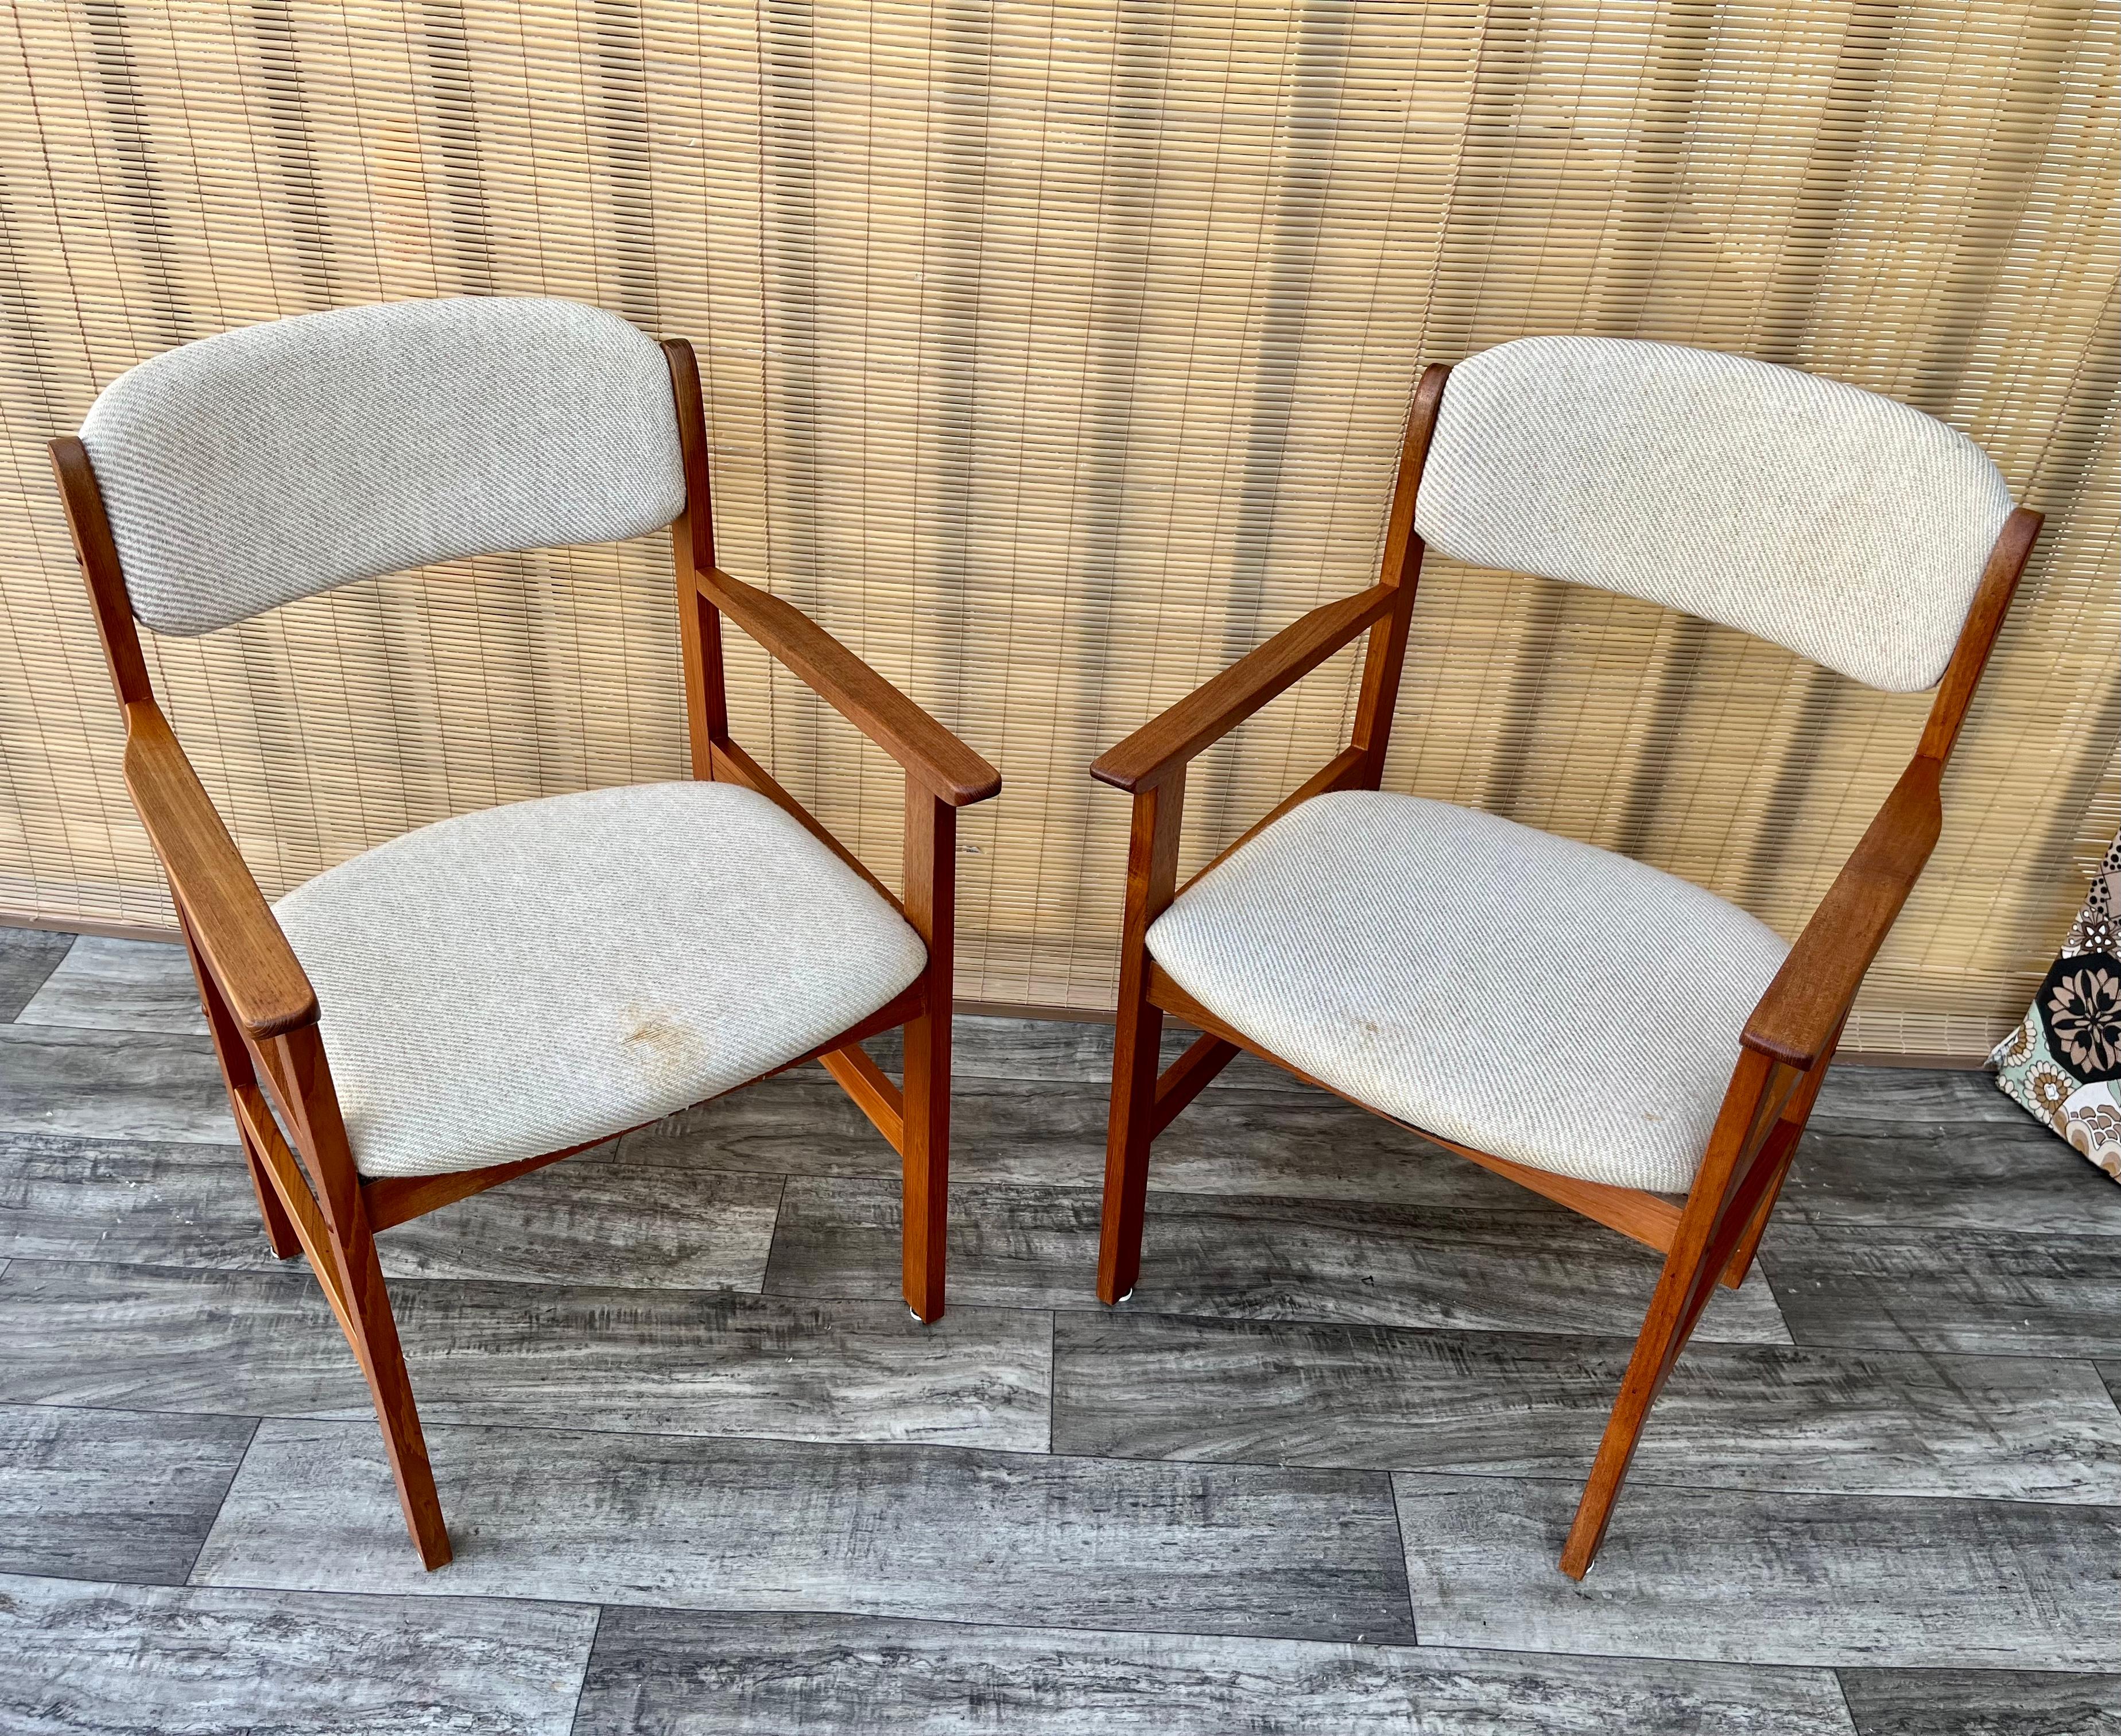 benny linden chairs